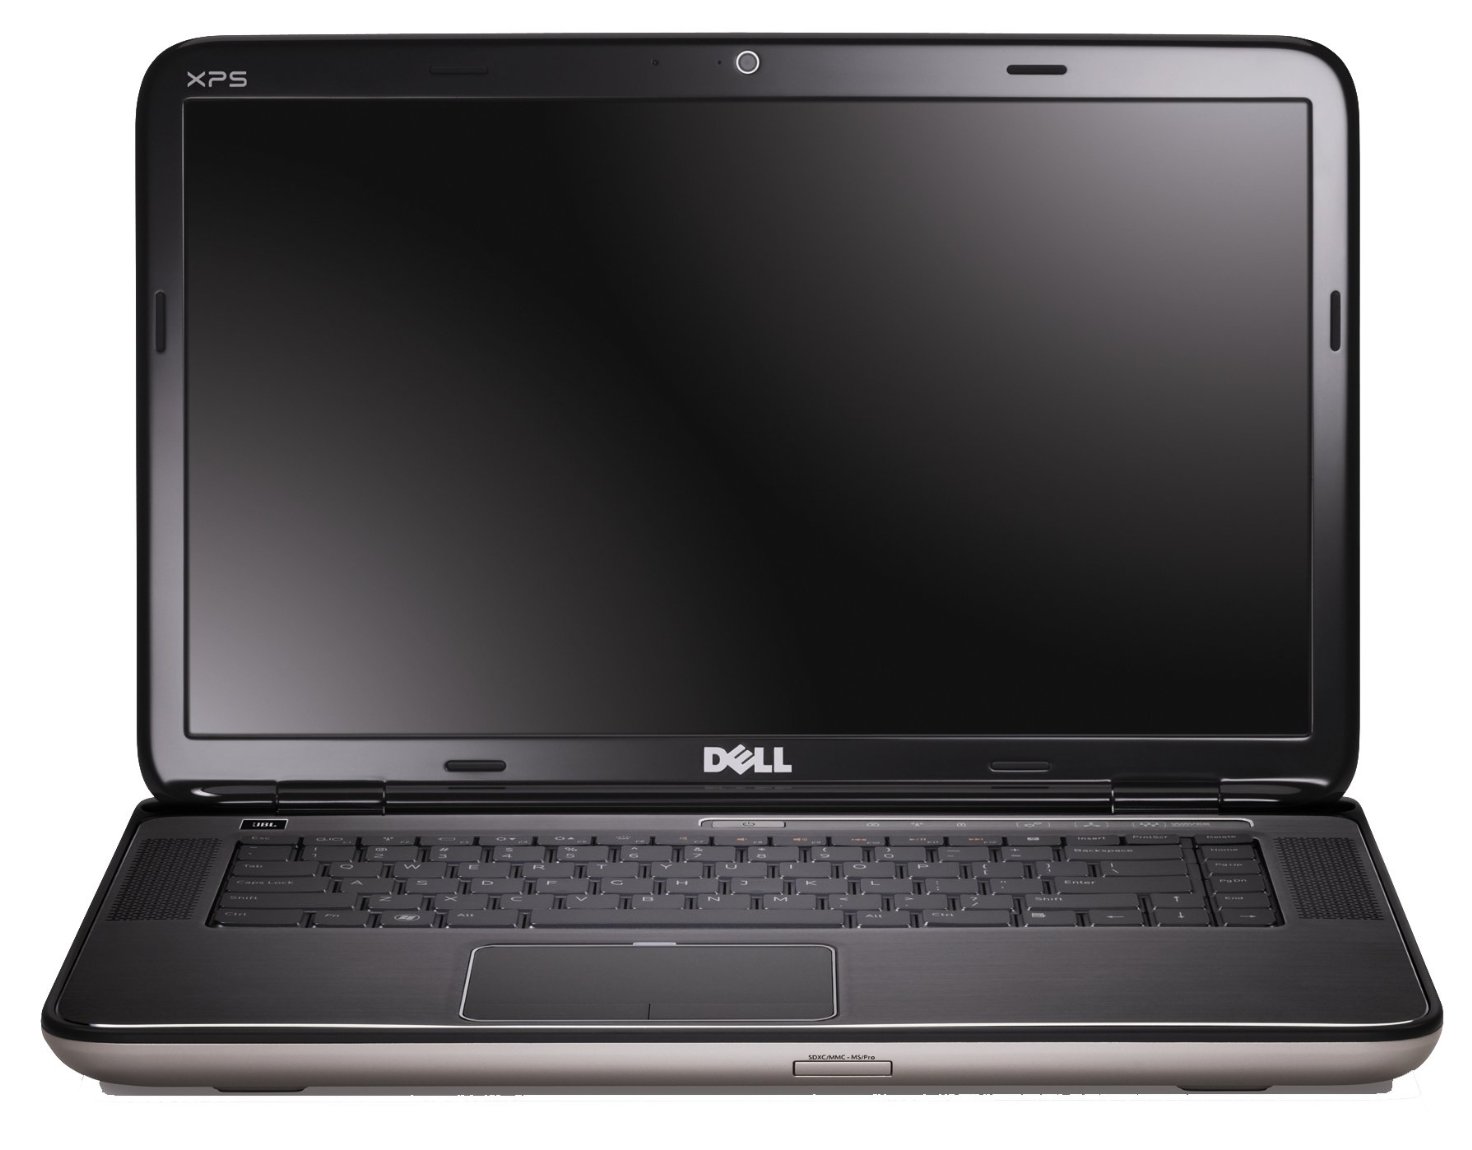  Dell XPS 15 7590-6572  #1